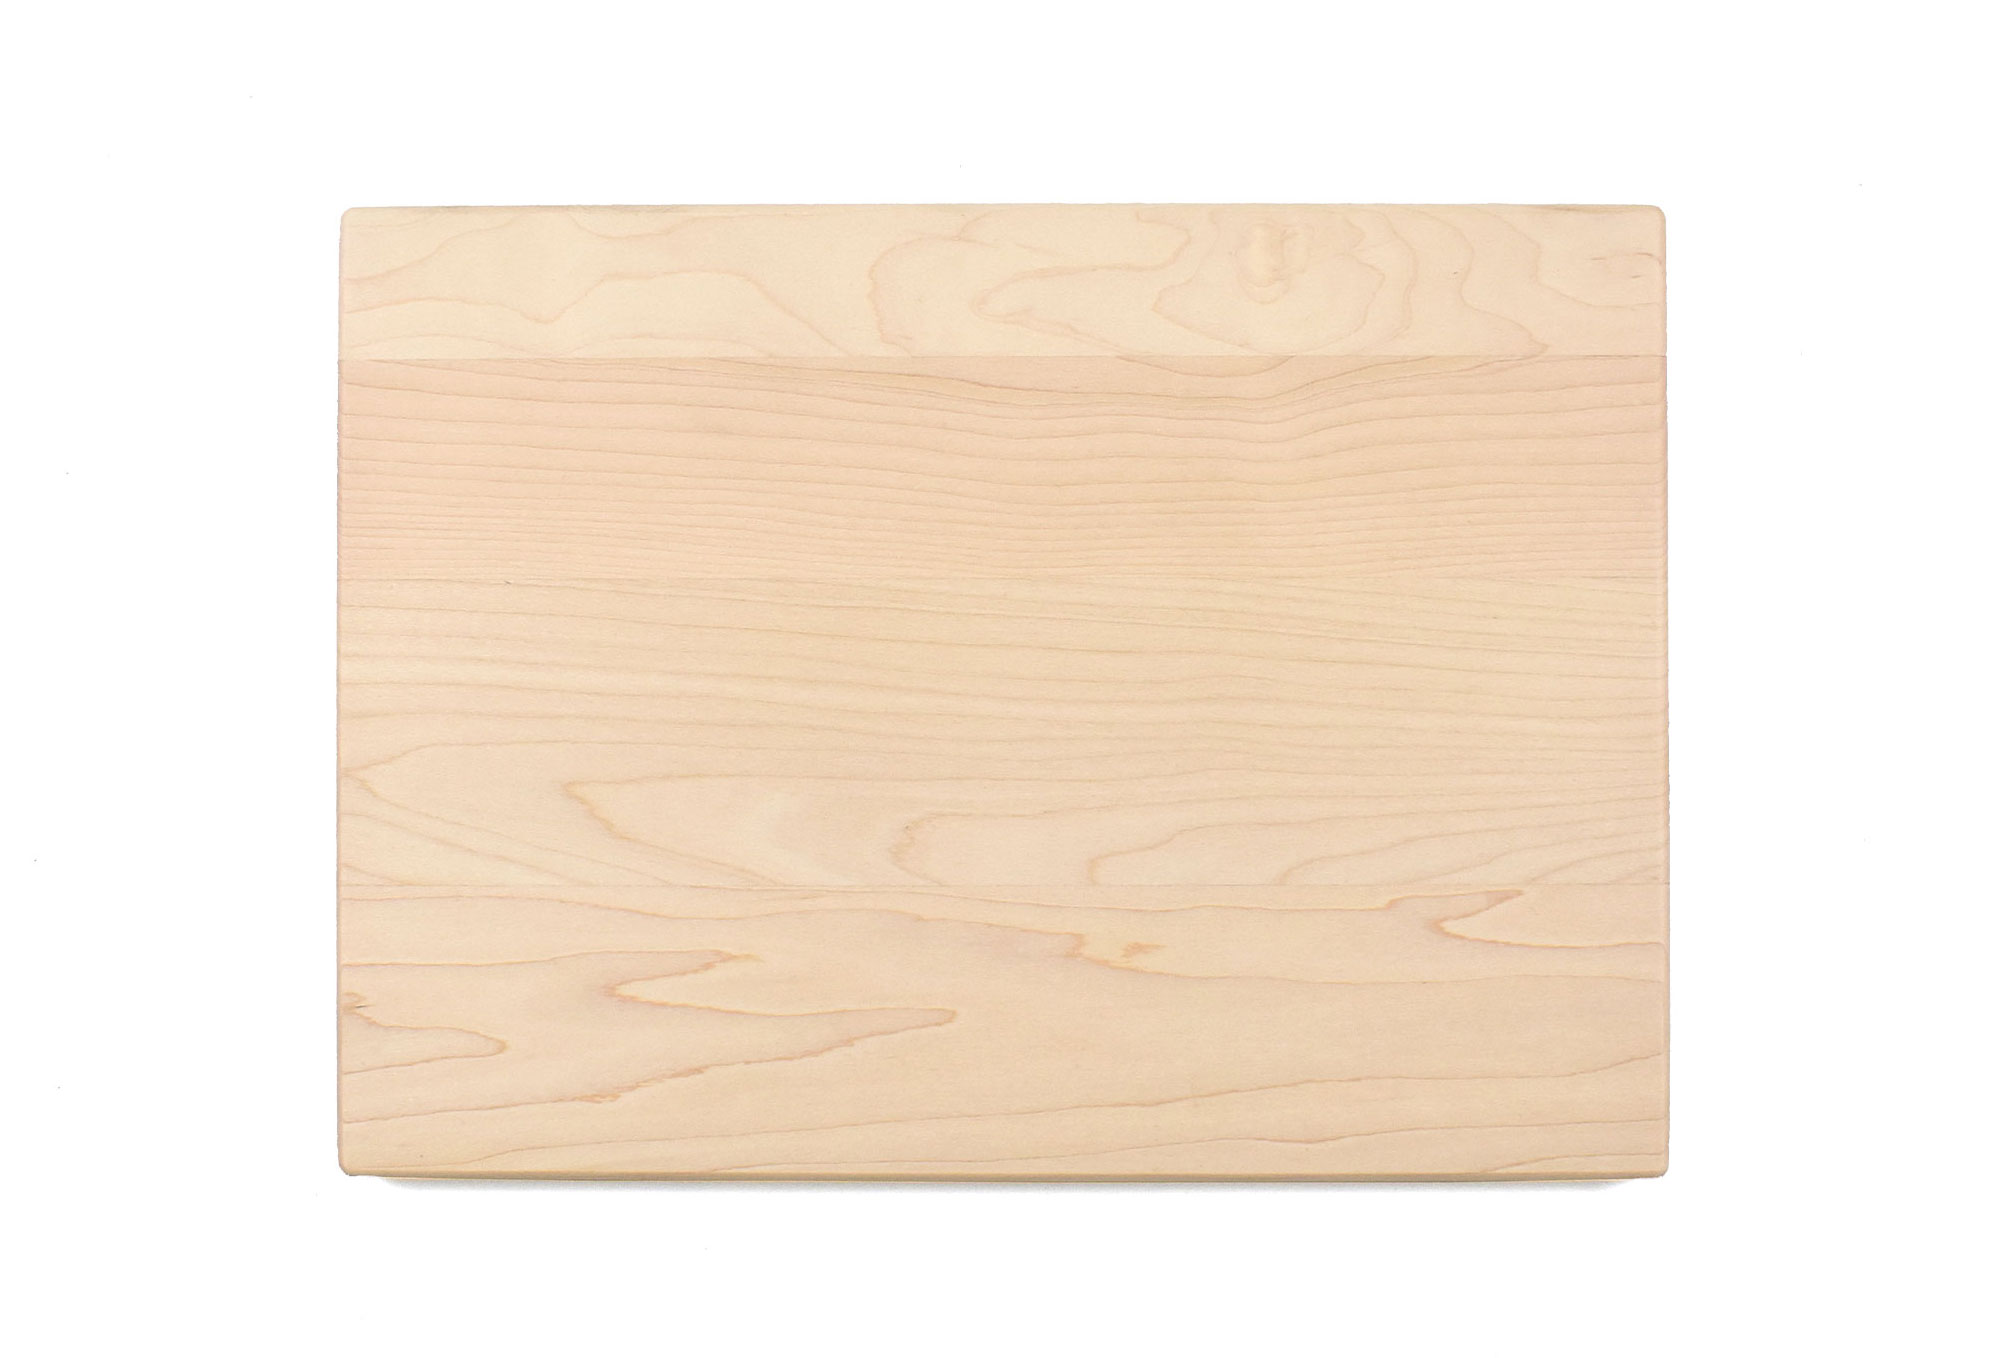 20 Wholesale cutting boards - Small Maple Cutting Board